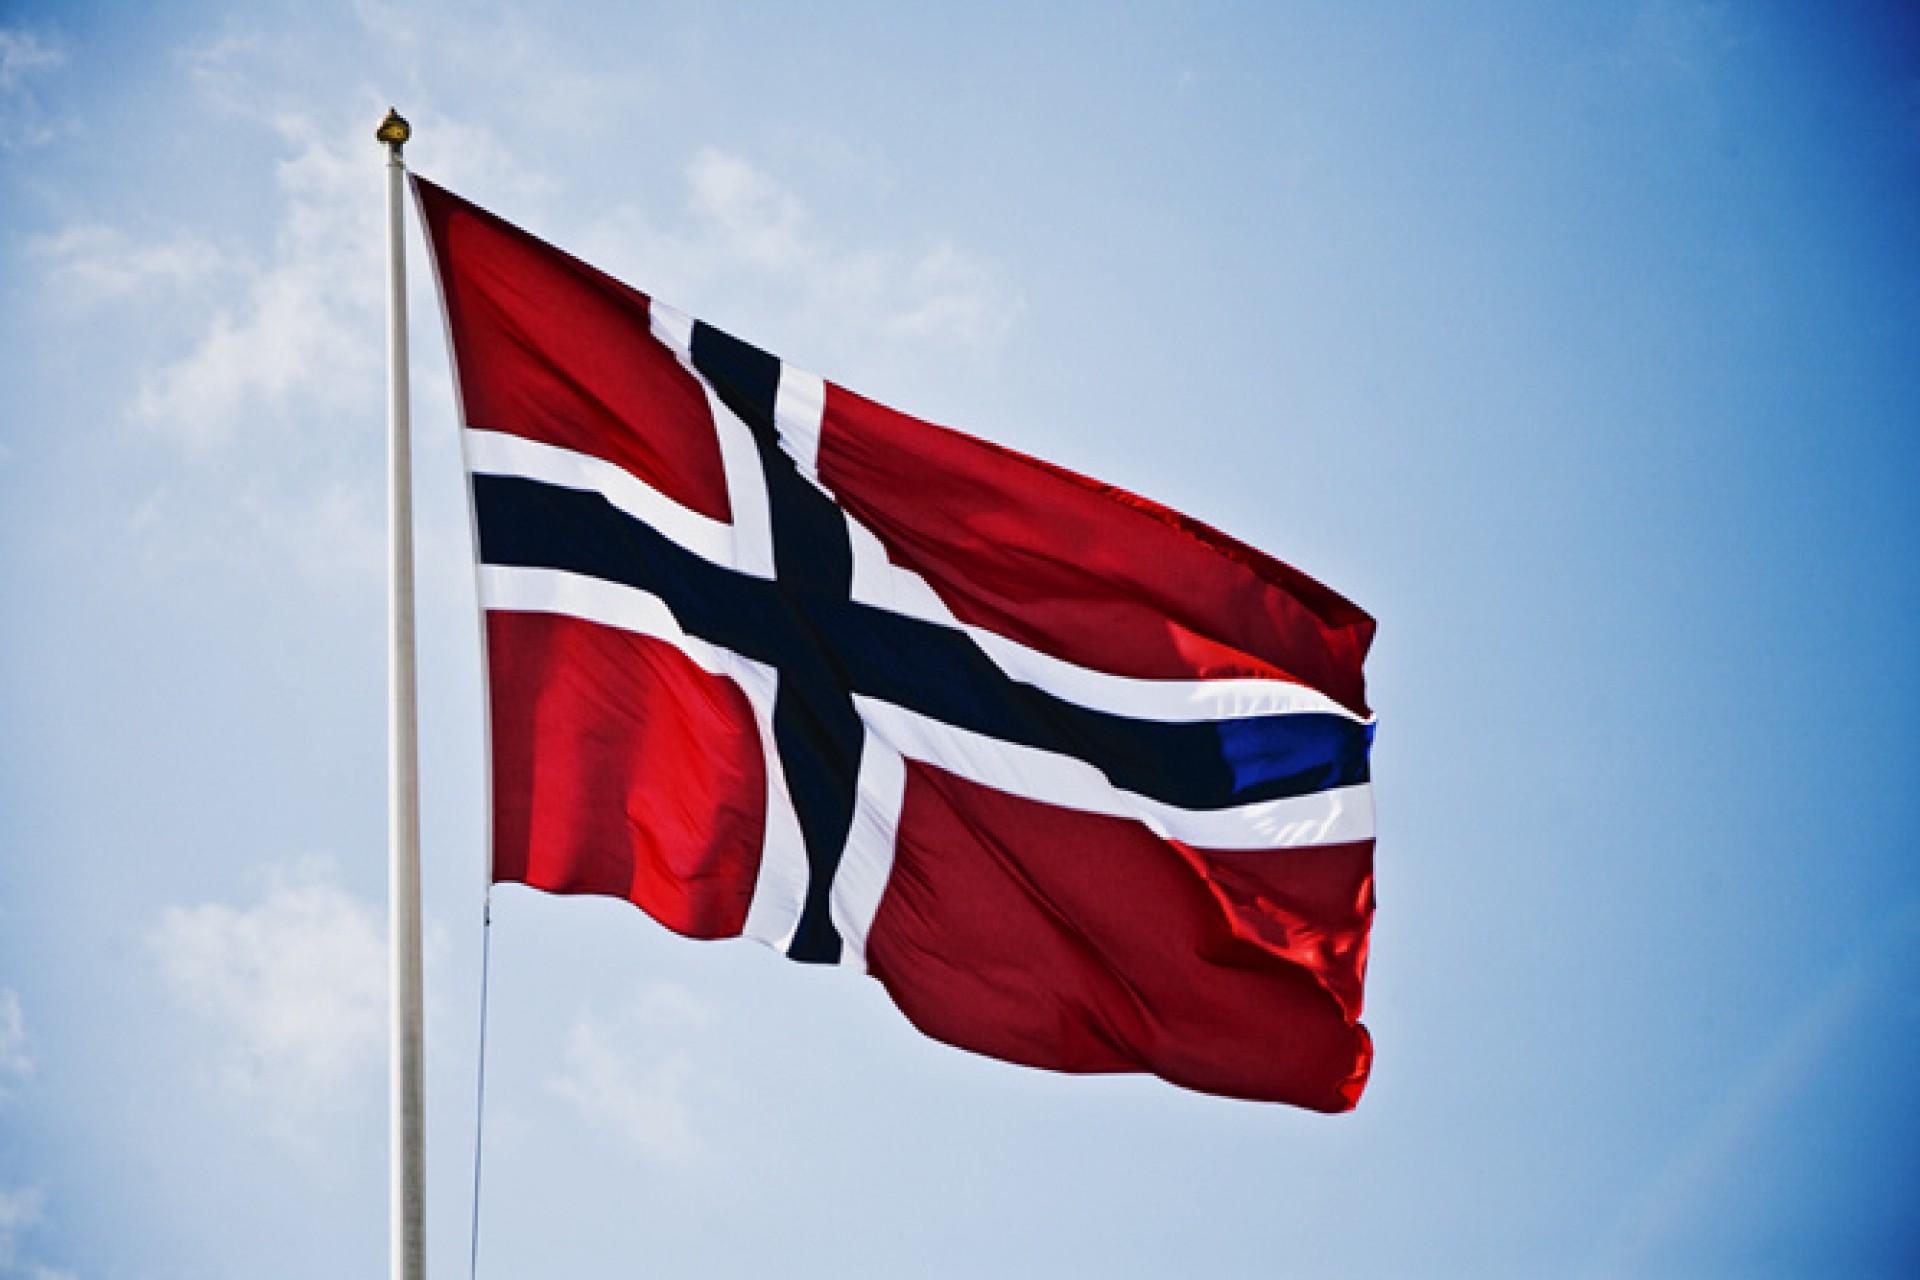 Happy National Day, Norway!